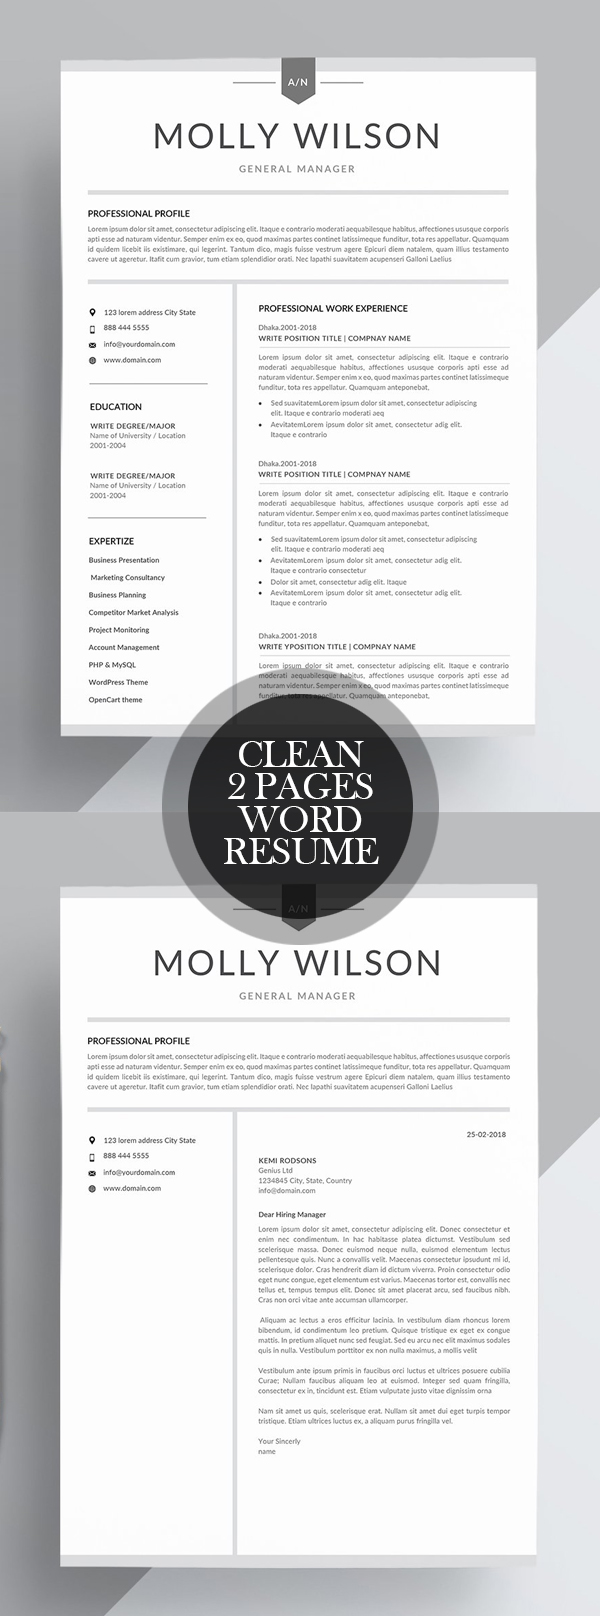 Clean 2 Page Word Resume Template